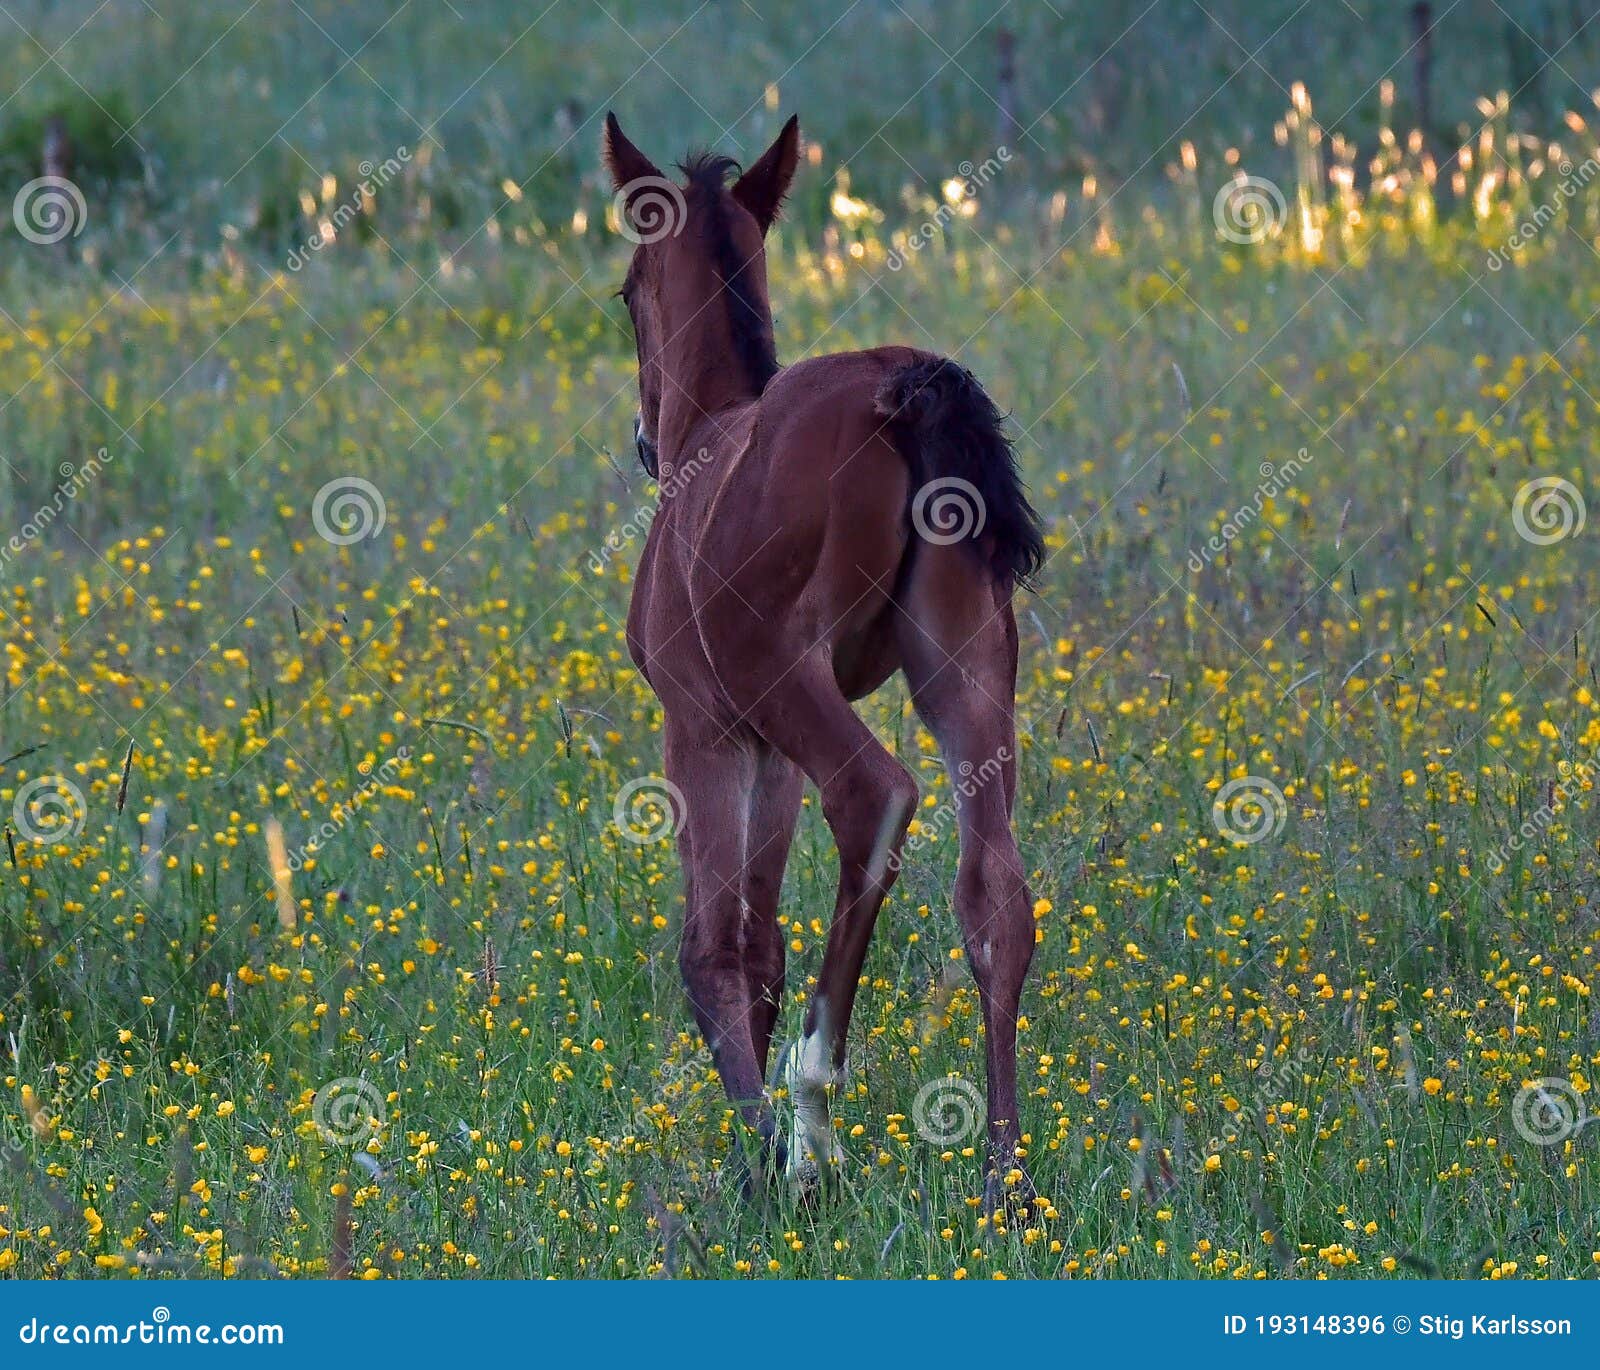 a warm-blooded foal playing on a summer meadow